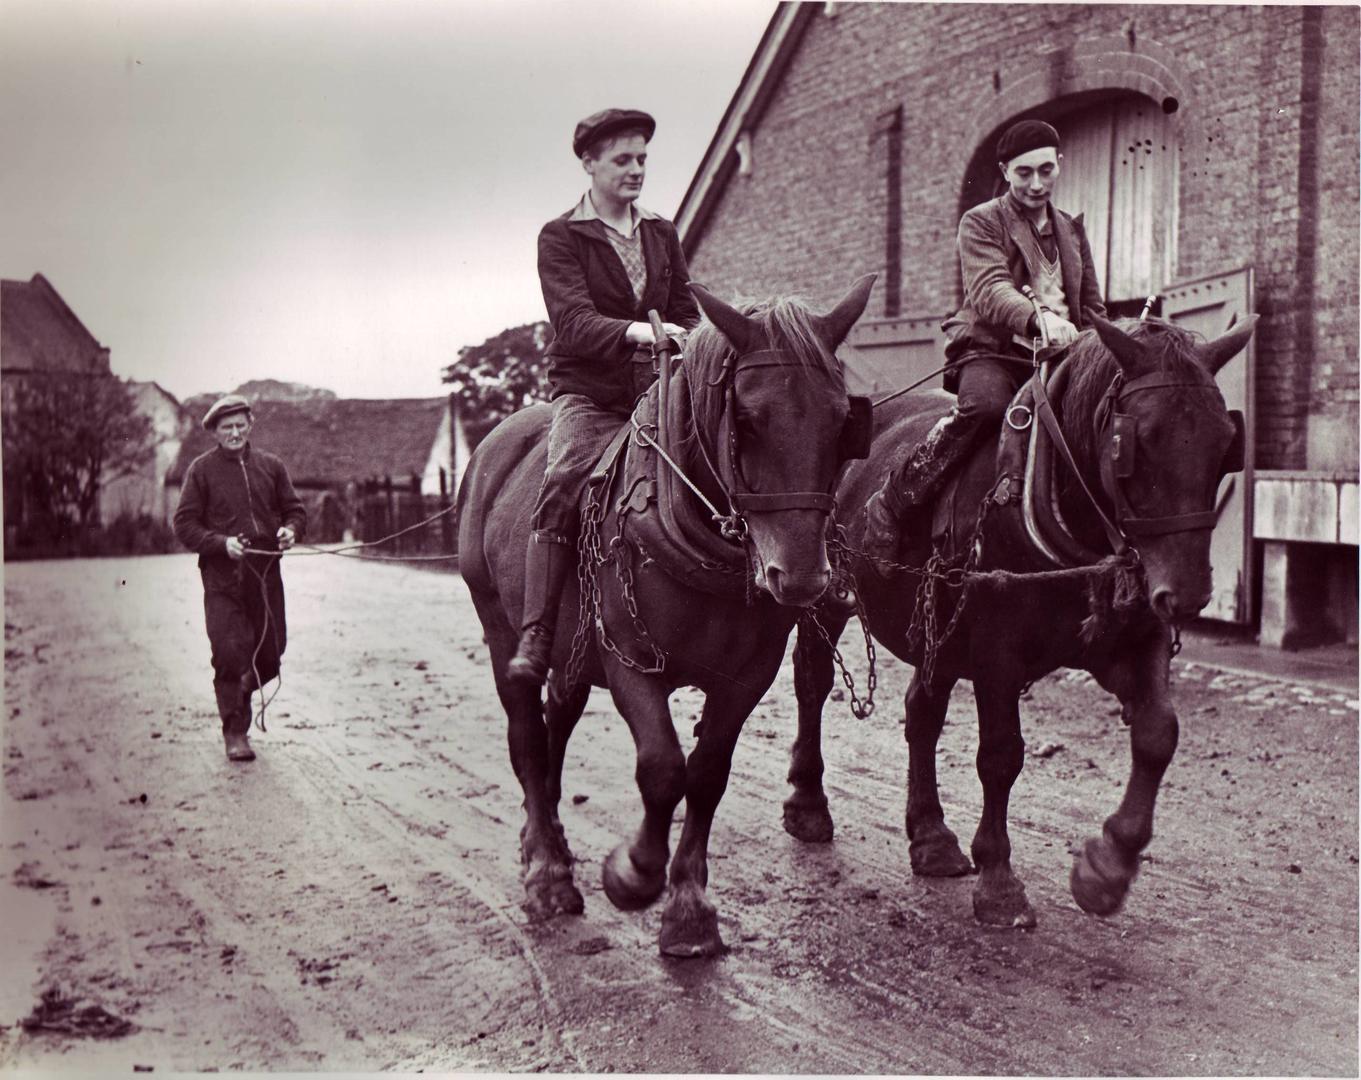 An old black and white image from the archives showing the Hadleigh Farm colony horses. 